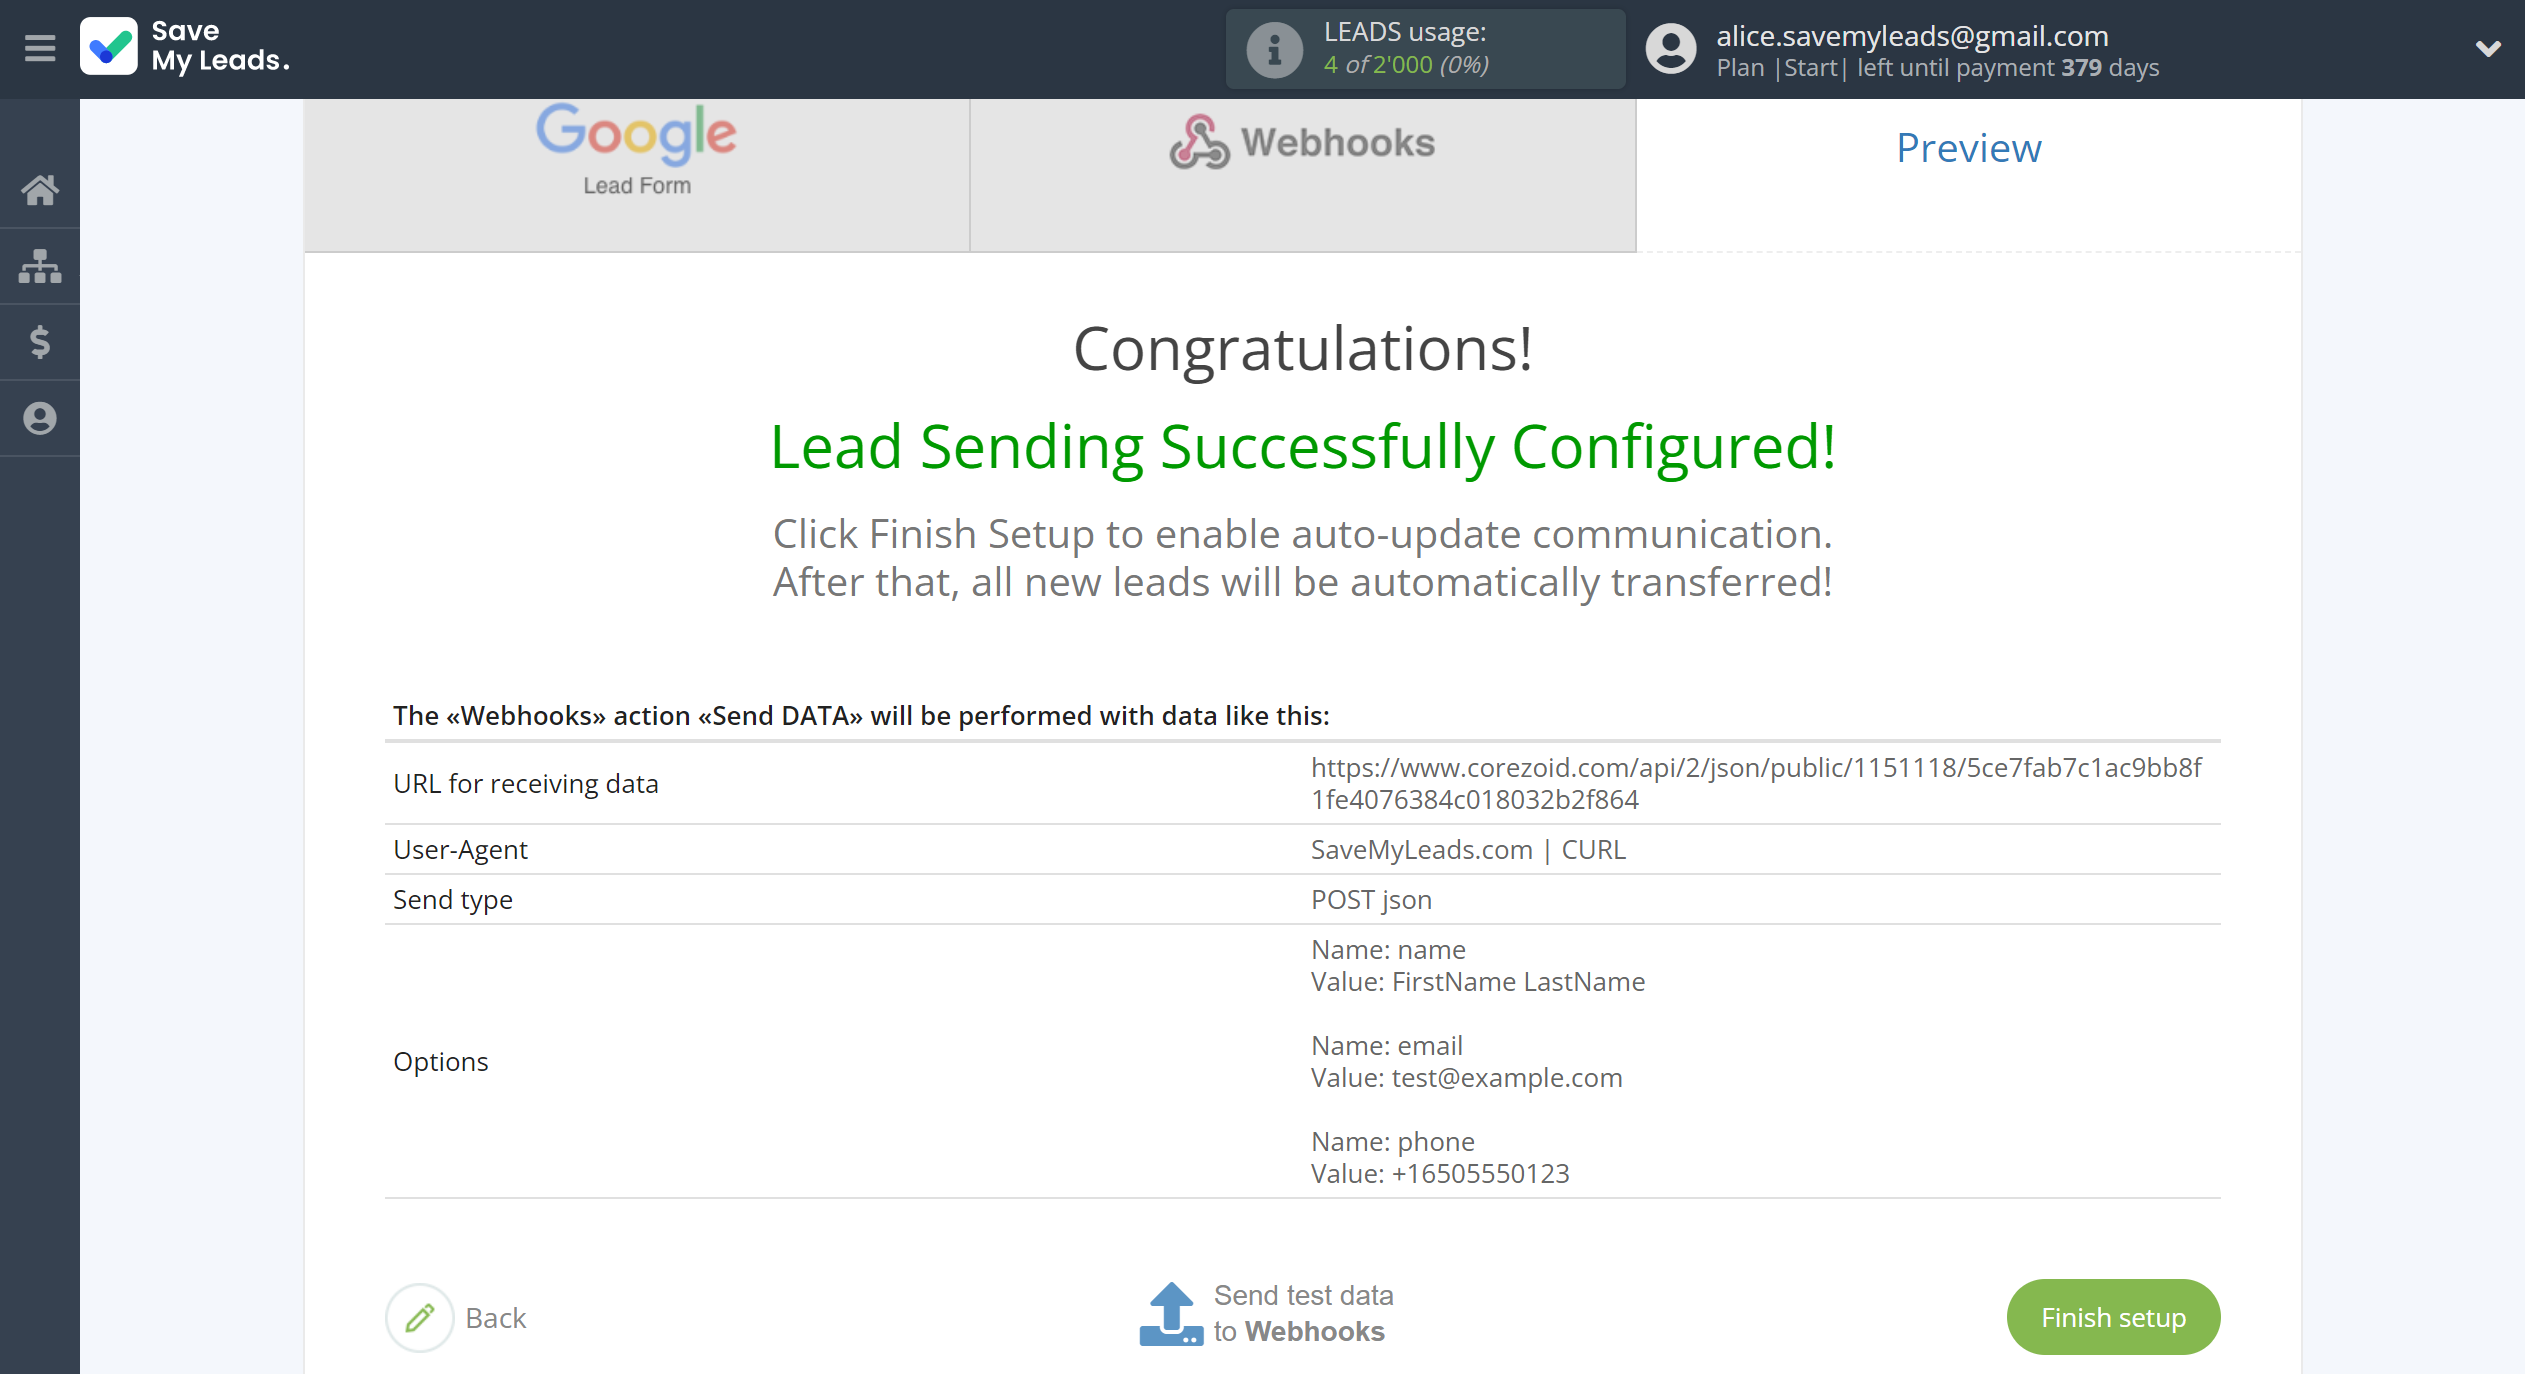 How to Connect Google Lead Form with Webhooks | Test data